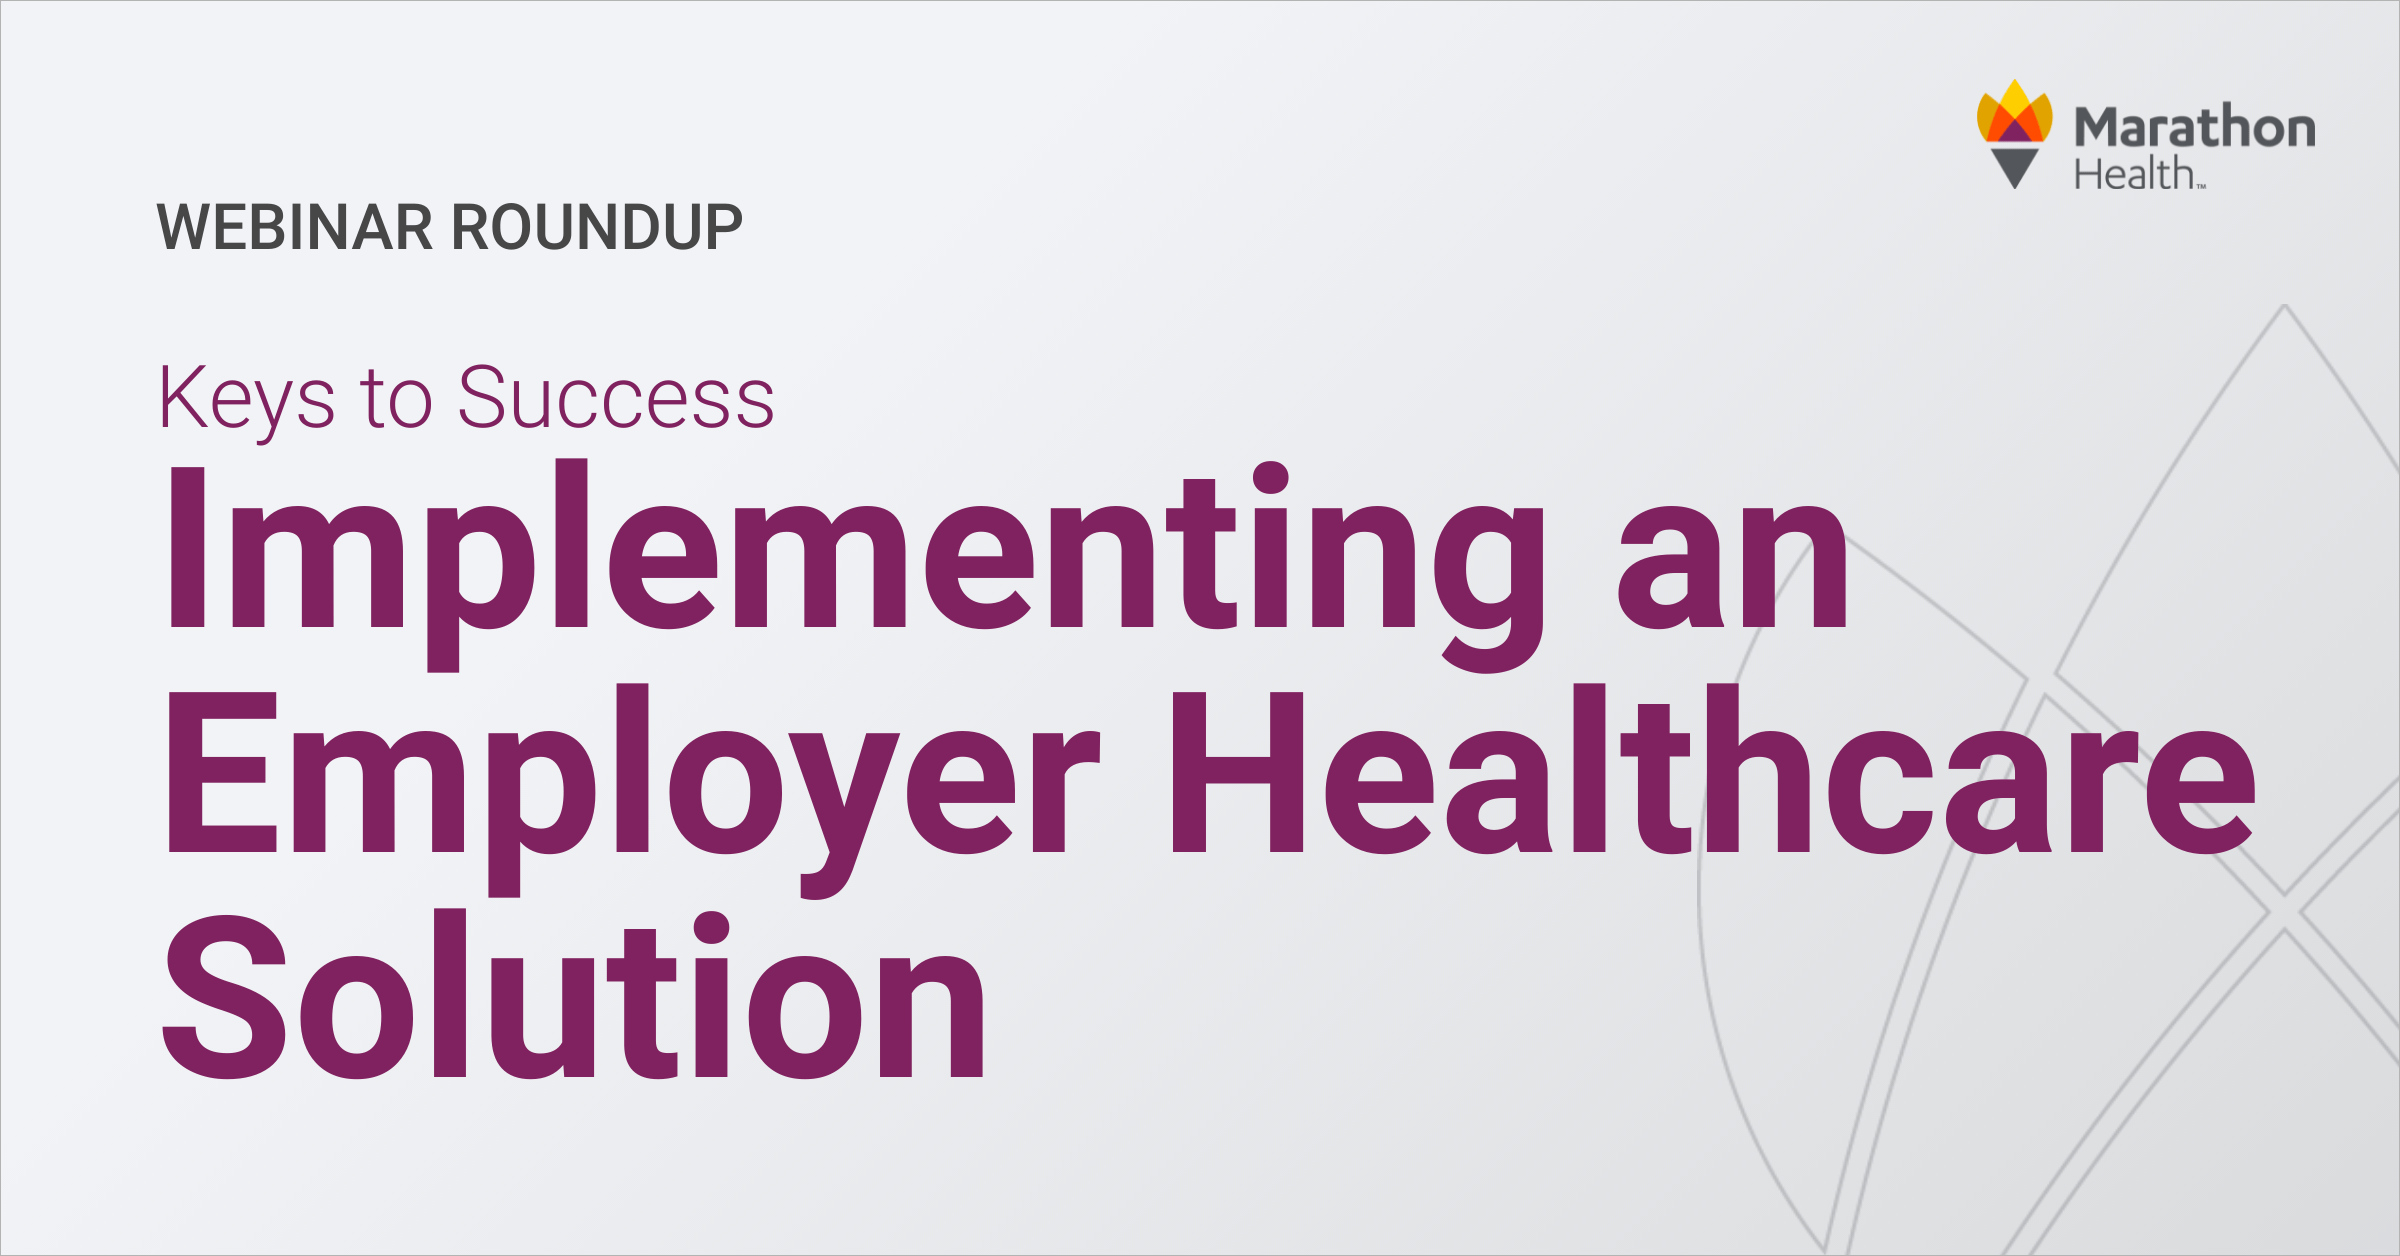 Webinar: Implementing an Employer Healthcare Solution